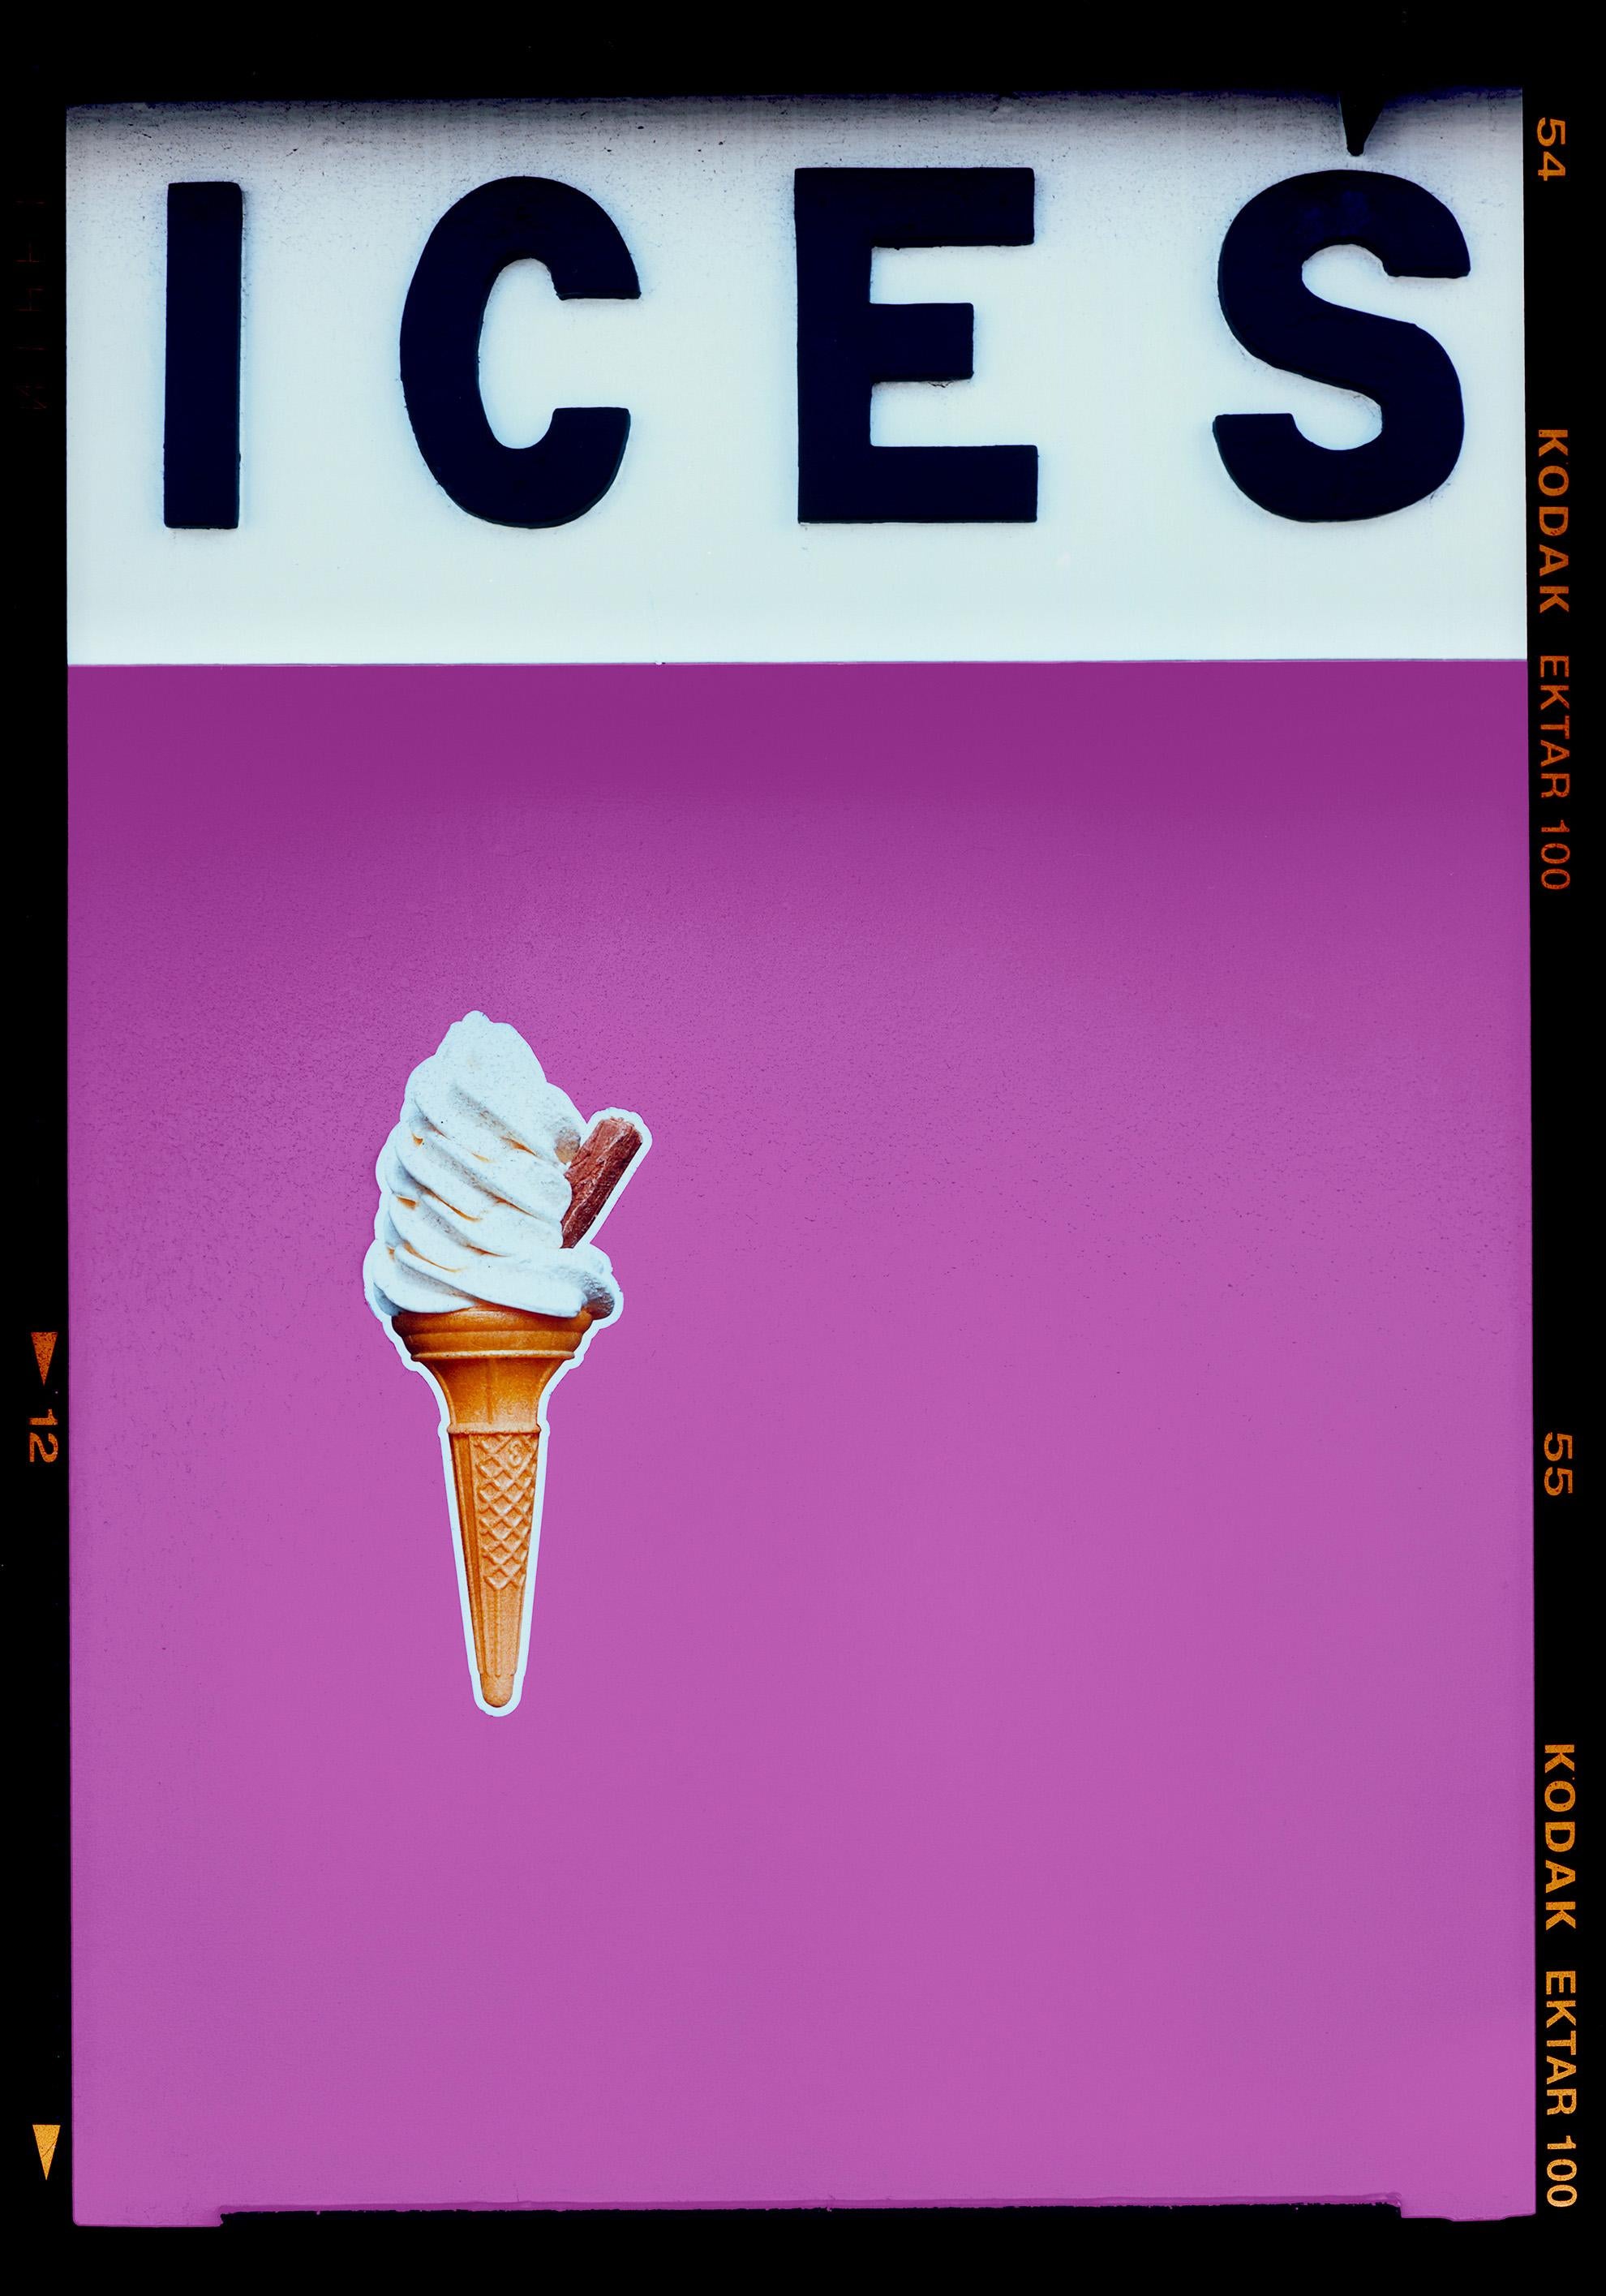 Richard Heeps Color Photograph - ICES (Plum), Bexhill-on-Sea - British seaside color photography